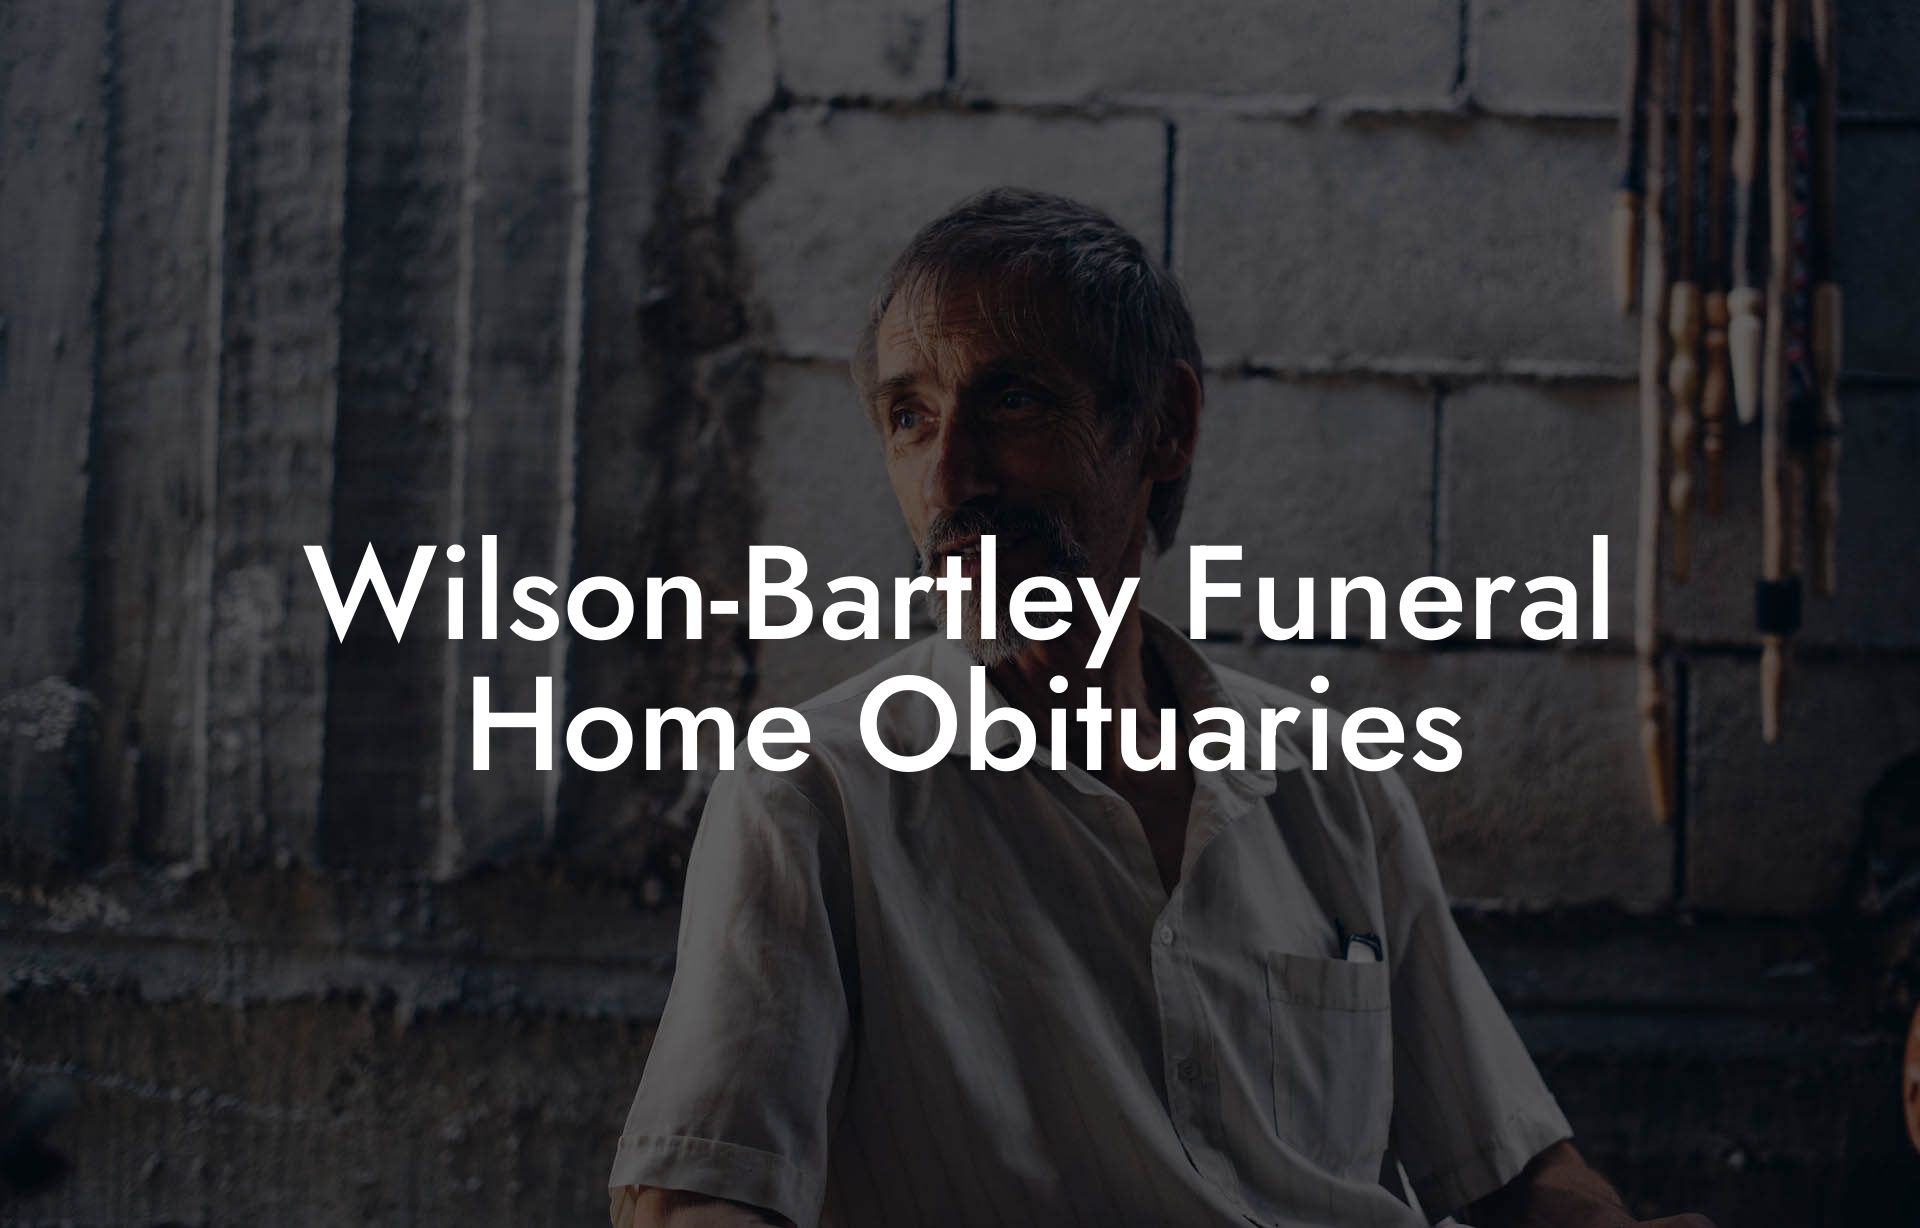 Wilson-Bartley Funeral Home Obituaries